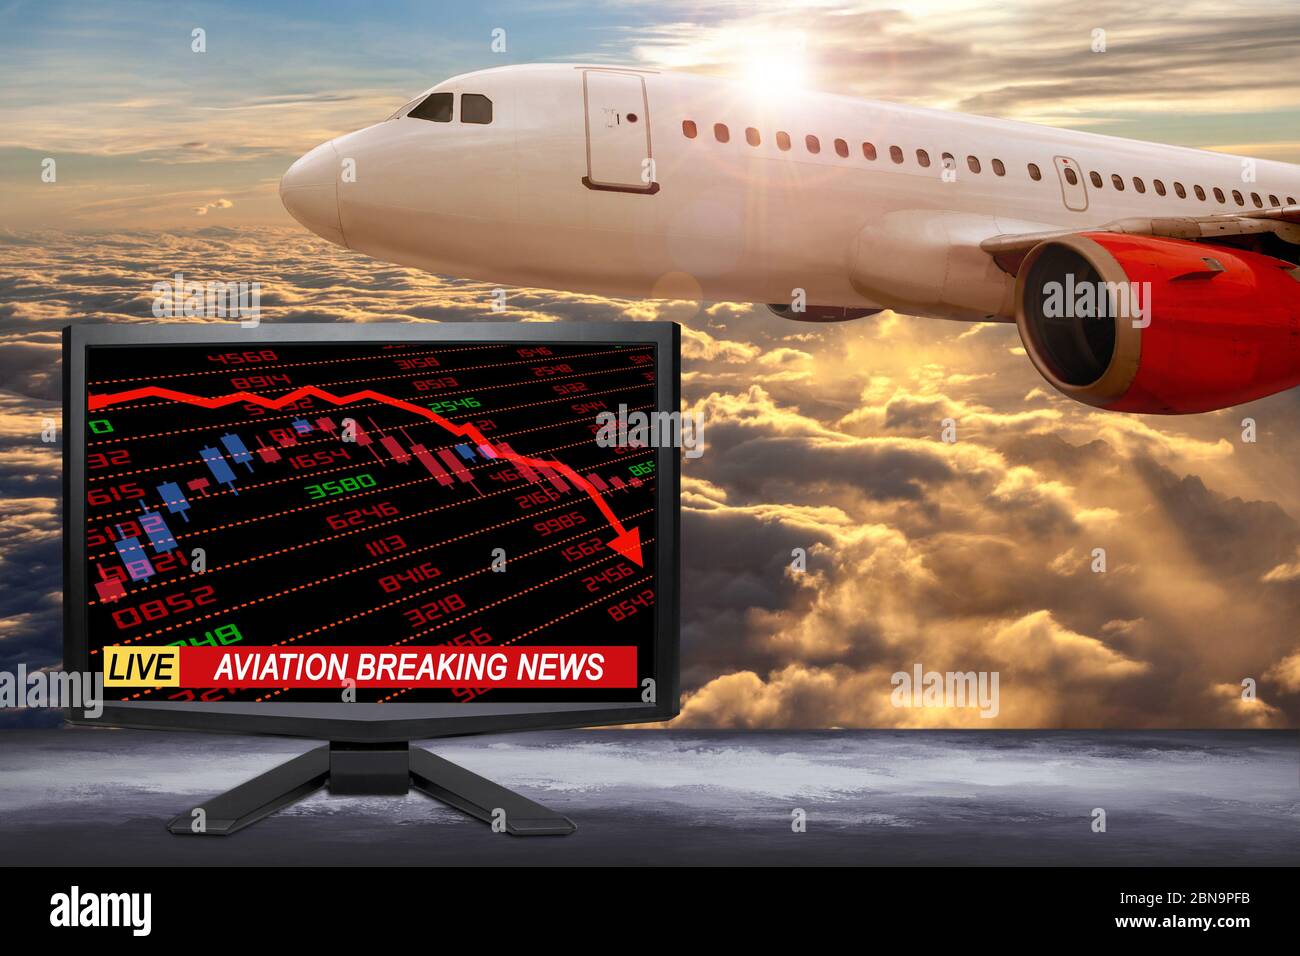 Live business breaking news update on TV screen with stock and financial indicators showing aviation and travel related industry in crisis due to Covi Stock Photo